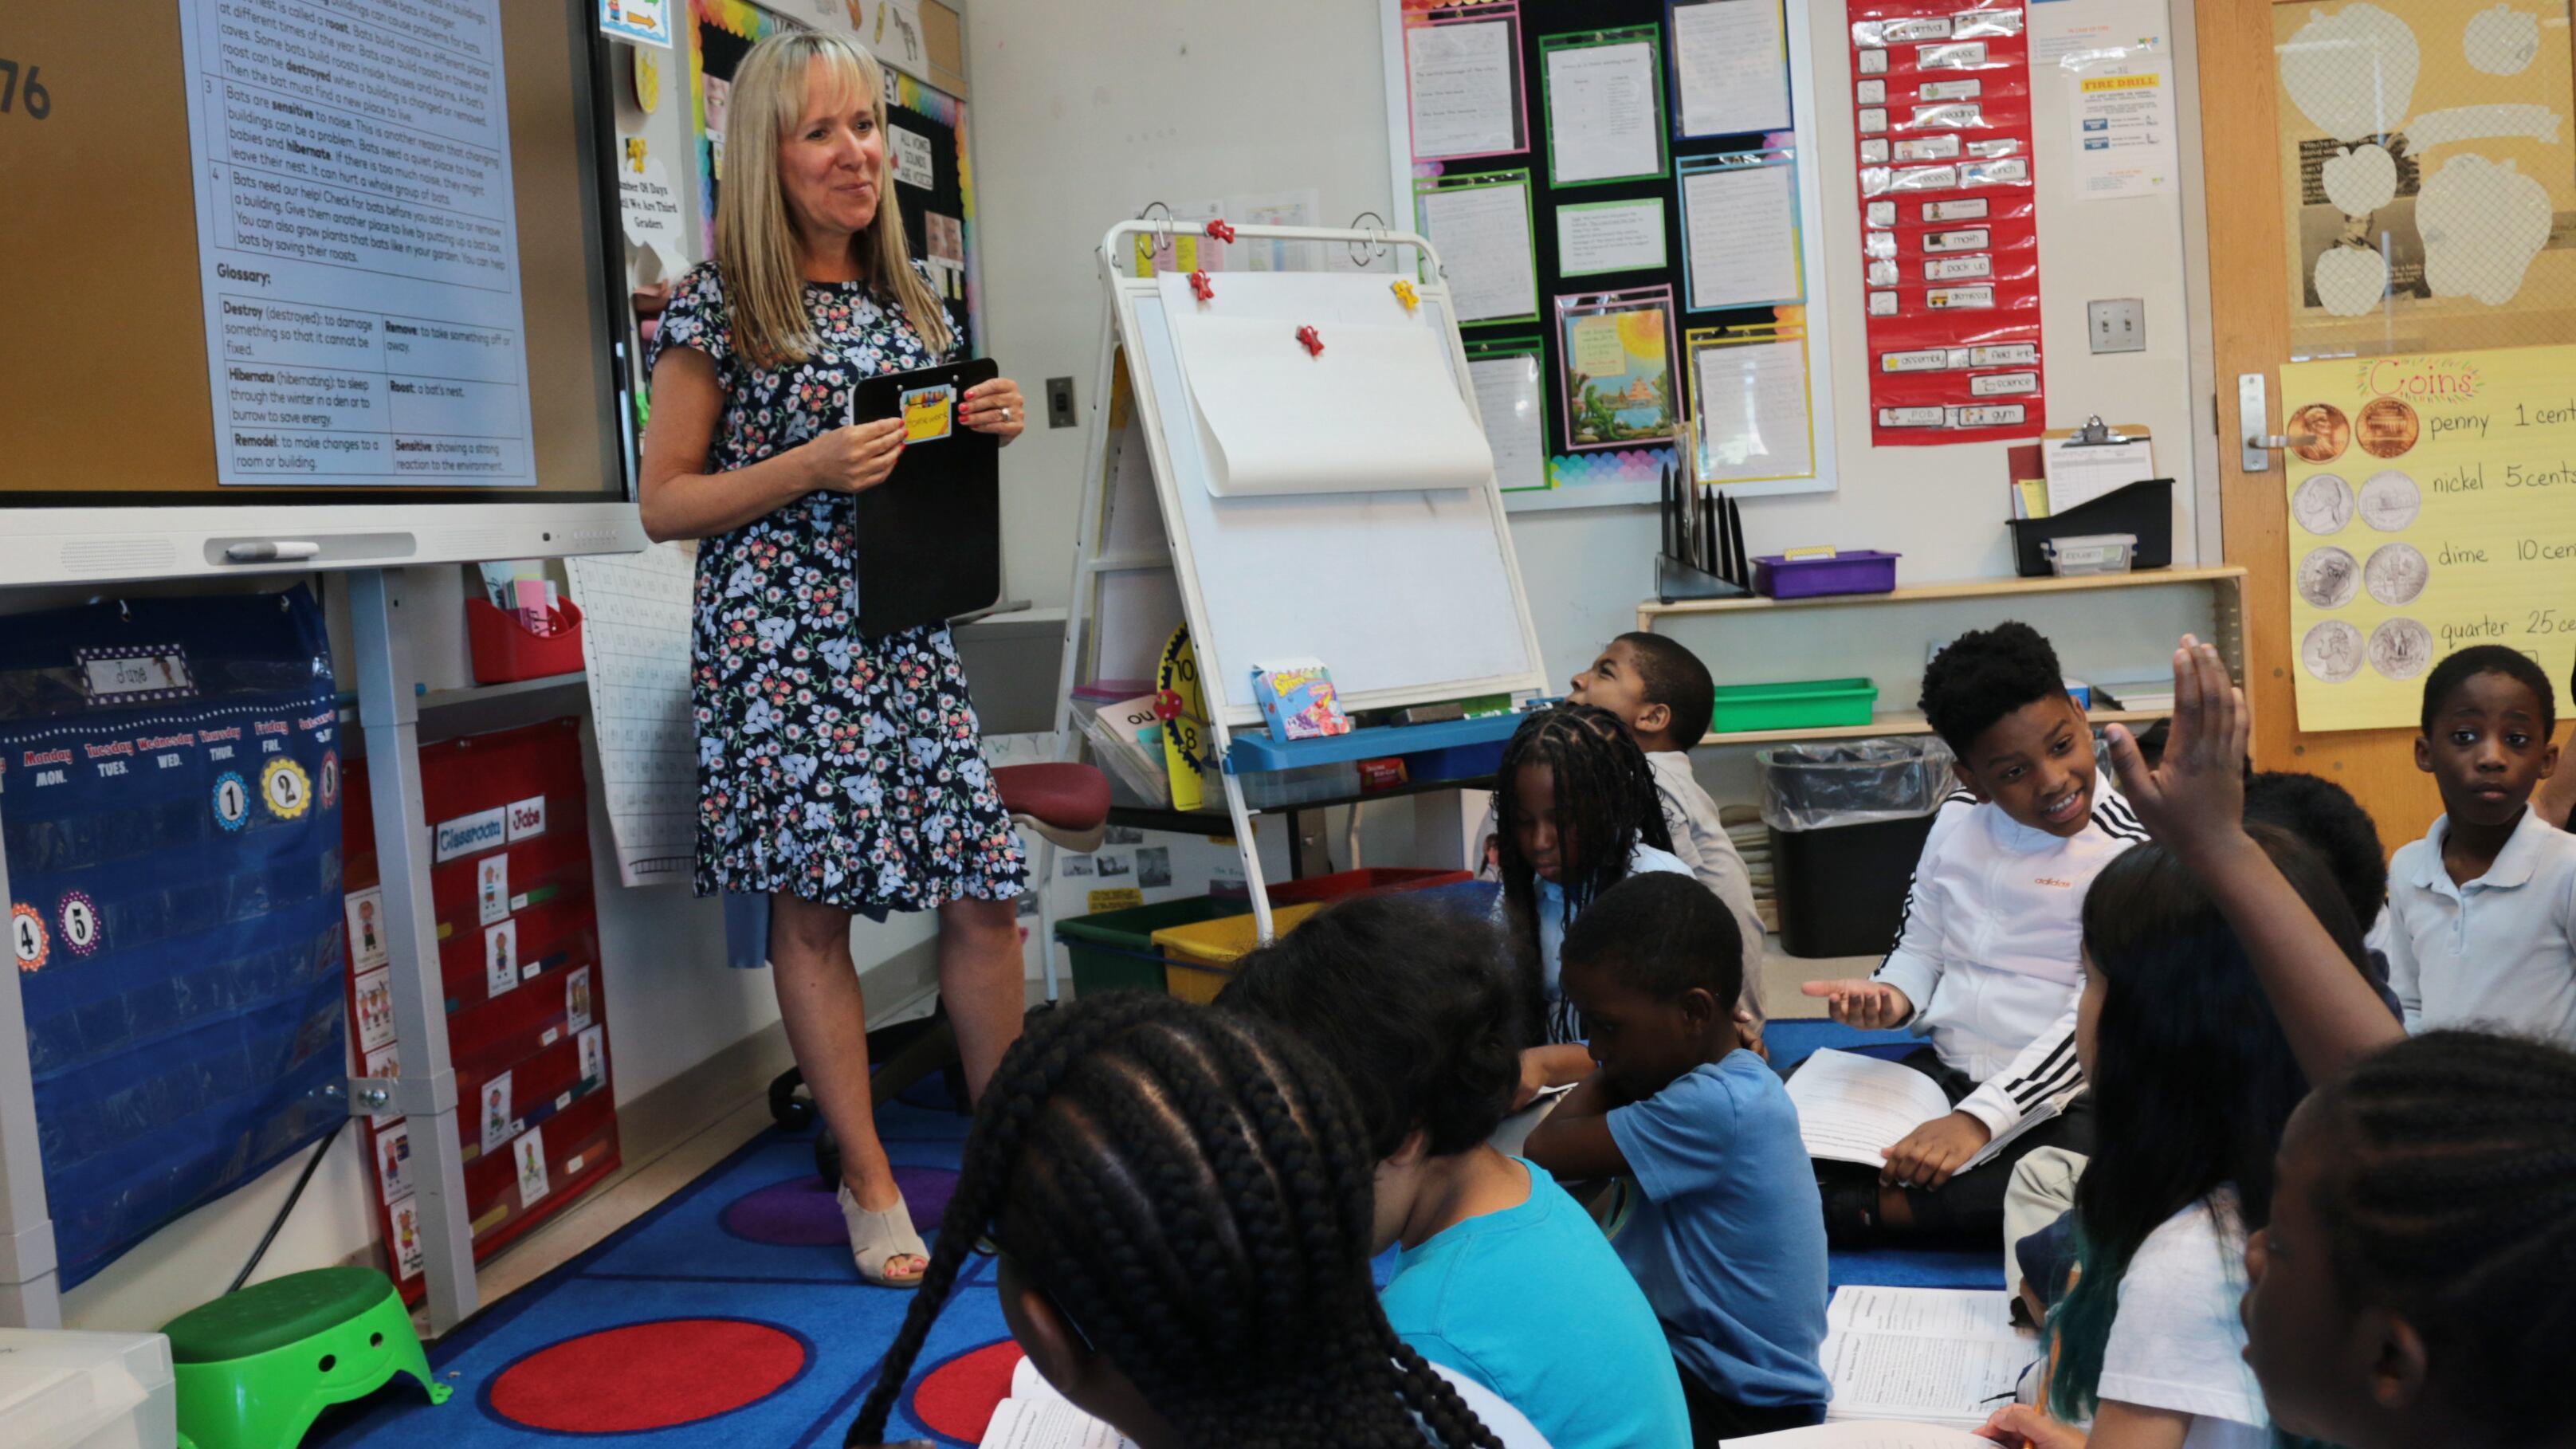 A blonde woman in a blue patterned dress stands in front of a classroom of students.